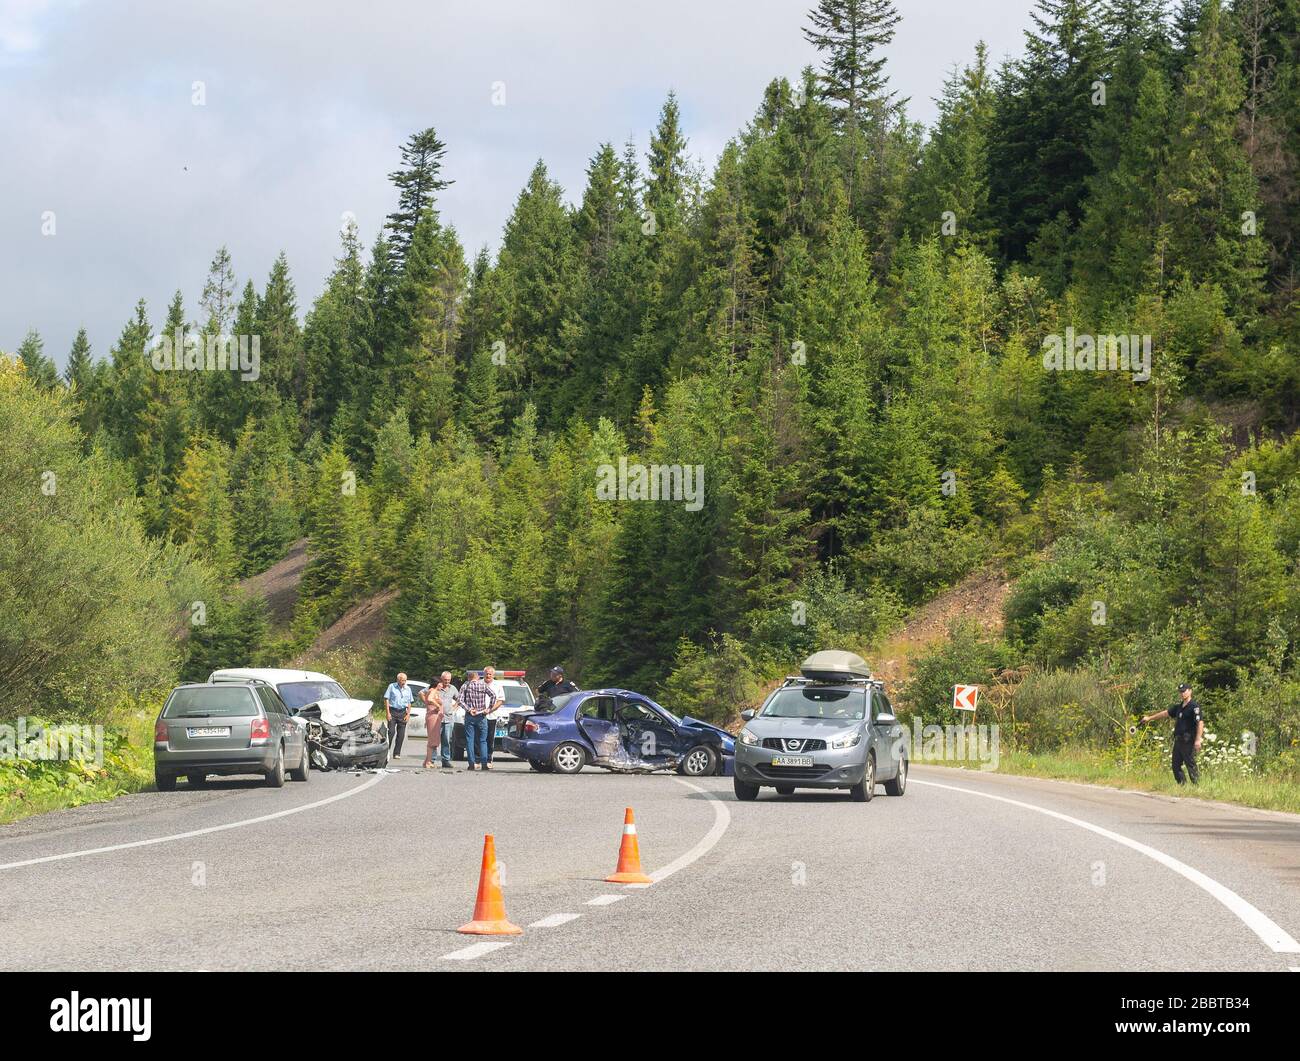 Svalyava, Ukraine. August 11, 2019: Fatal traffic accident. Real event. Two cars crashed on the road. Police officer interrogates participants and wit Stock Photo